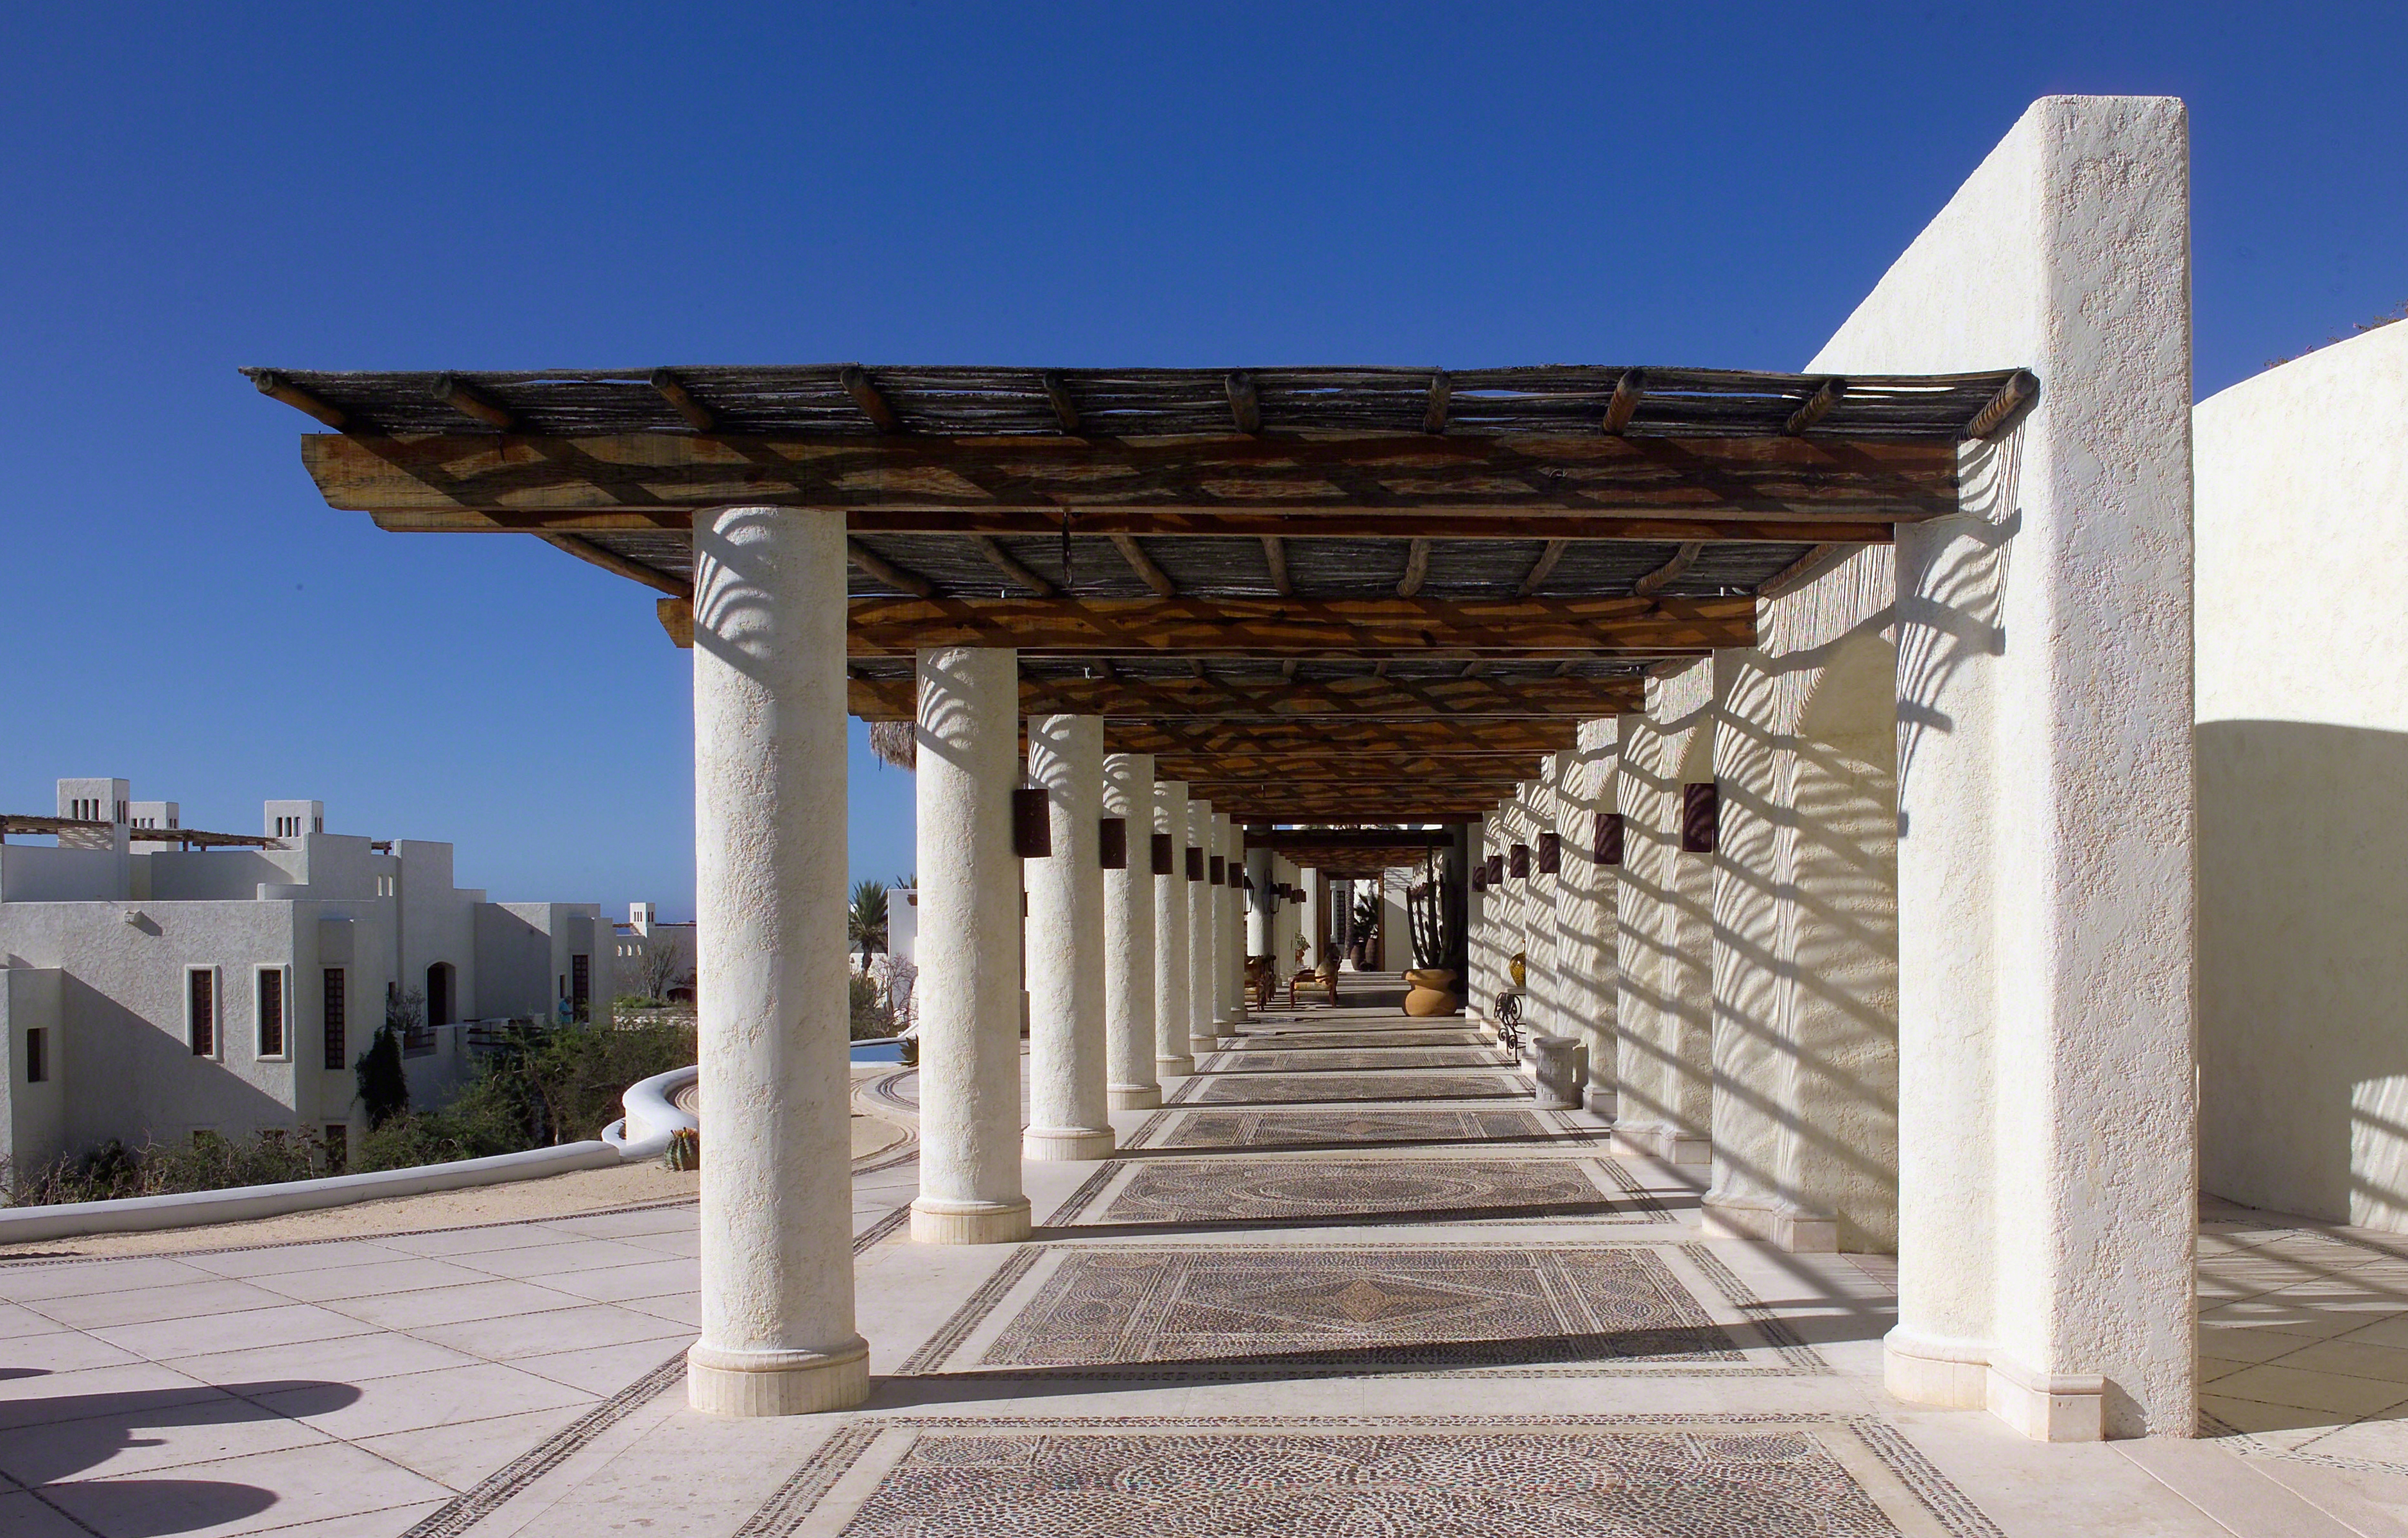 File:Outdoor covered walkway (Cabo San Lucas).jpg - Wikimedia Commons